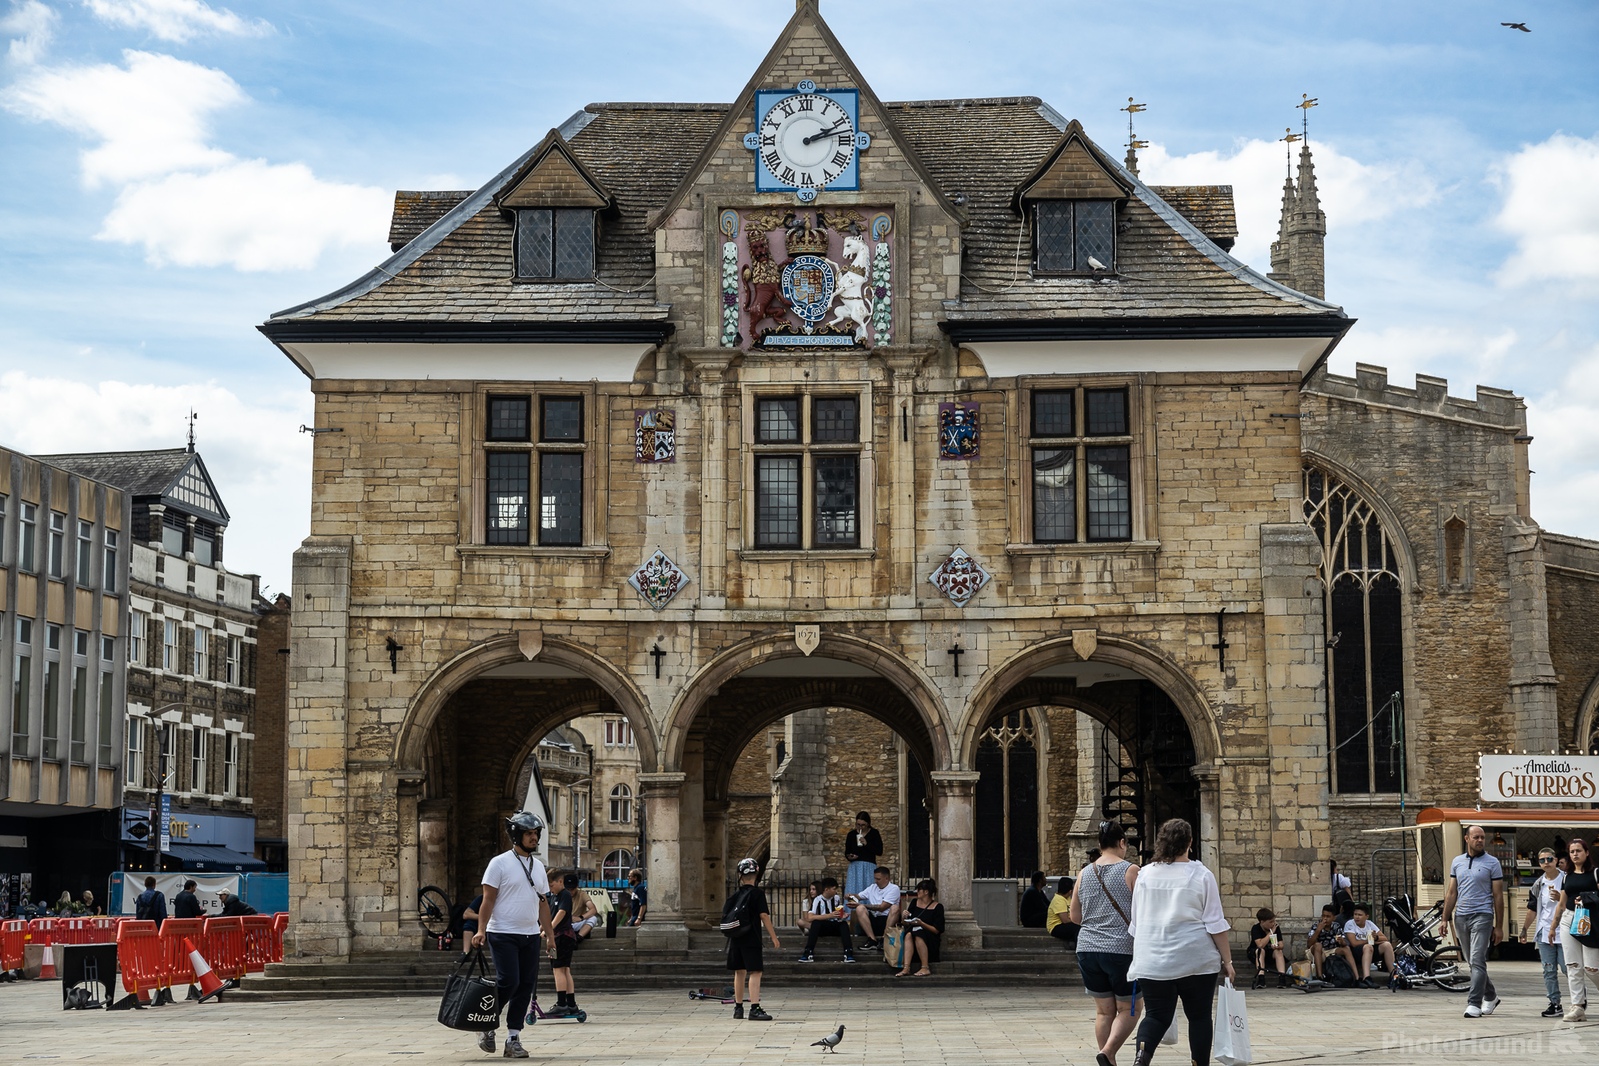 Image of Peterborough Guildhall by Carol Henson